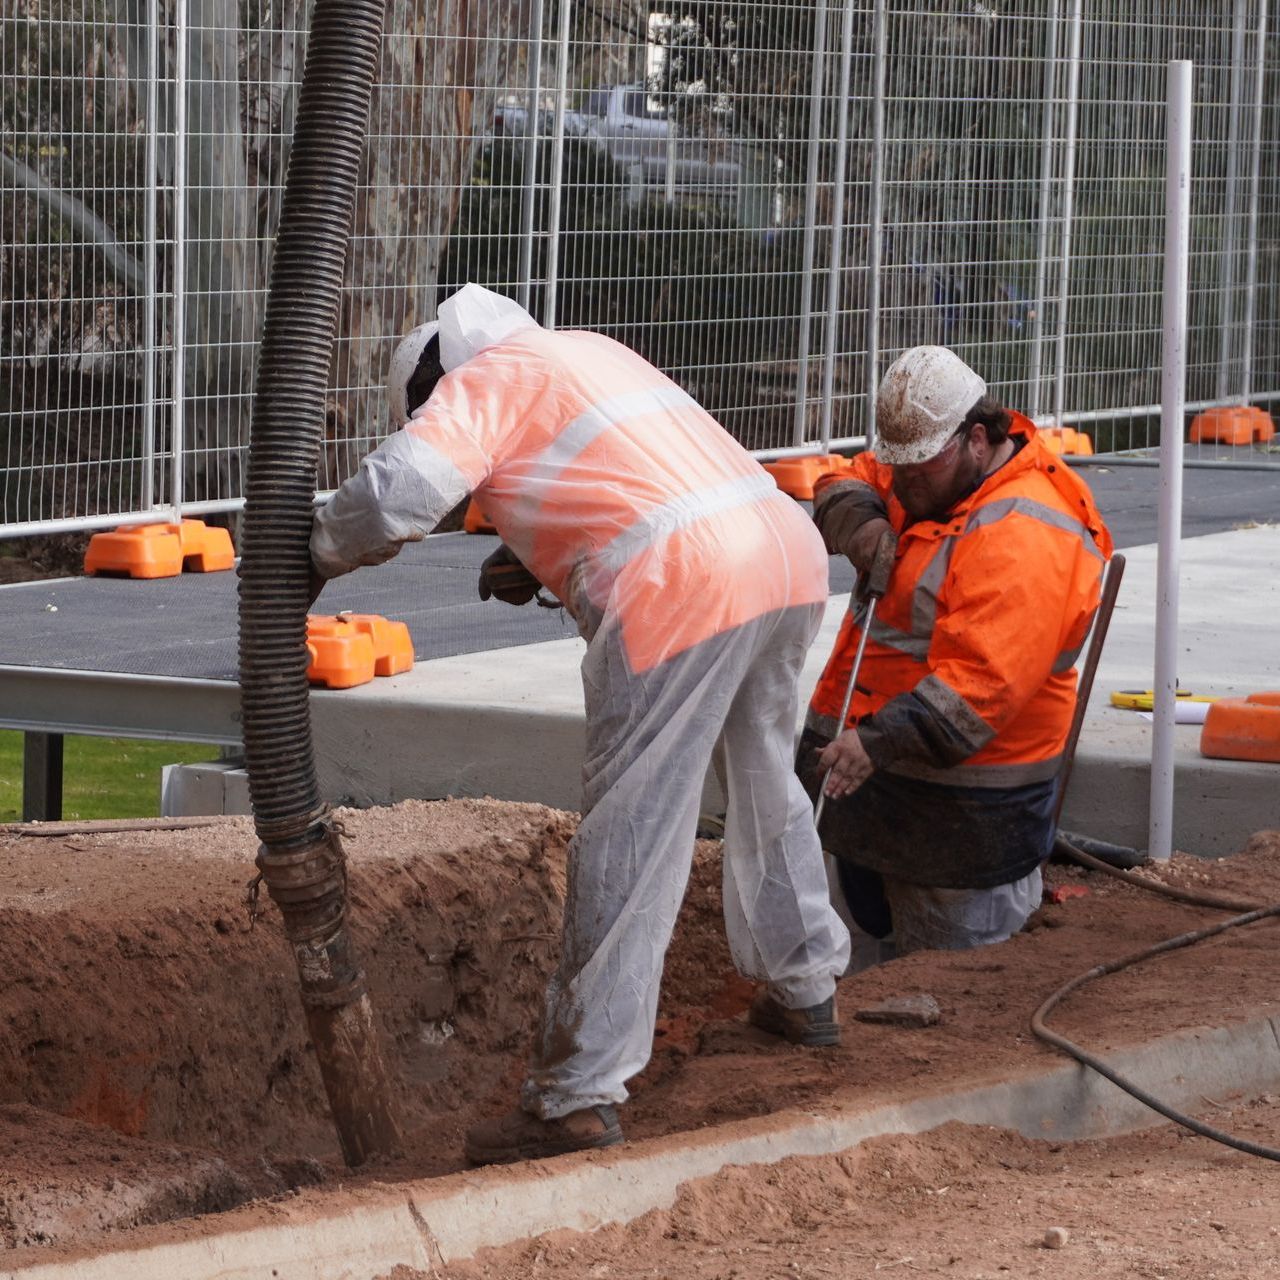 two construction workers are kneeling down in the dirt